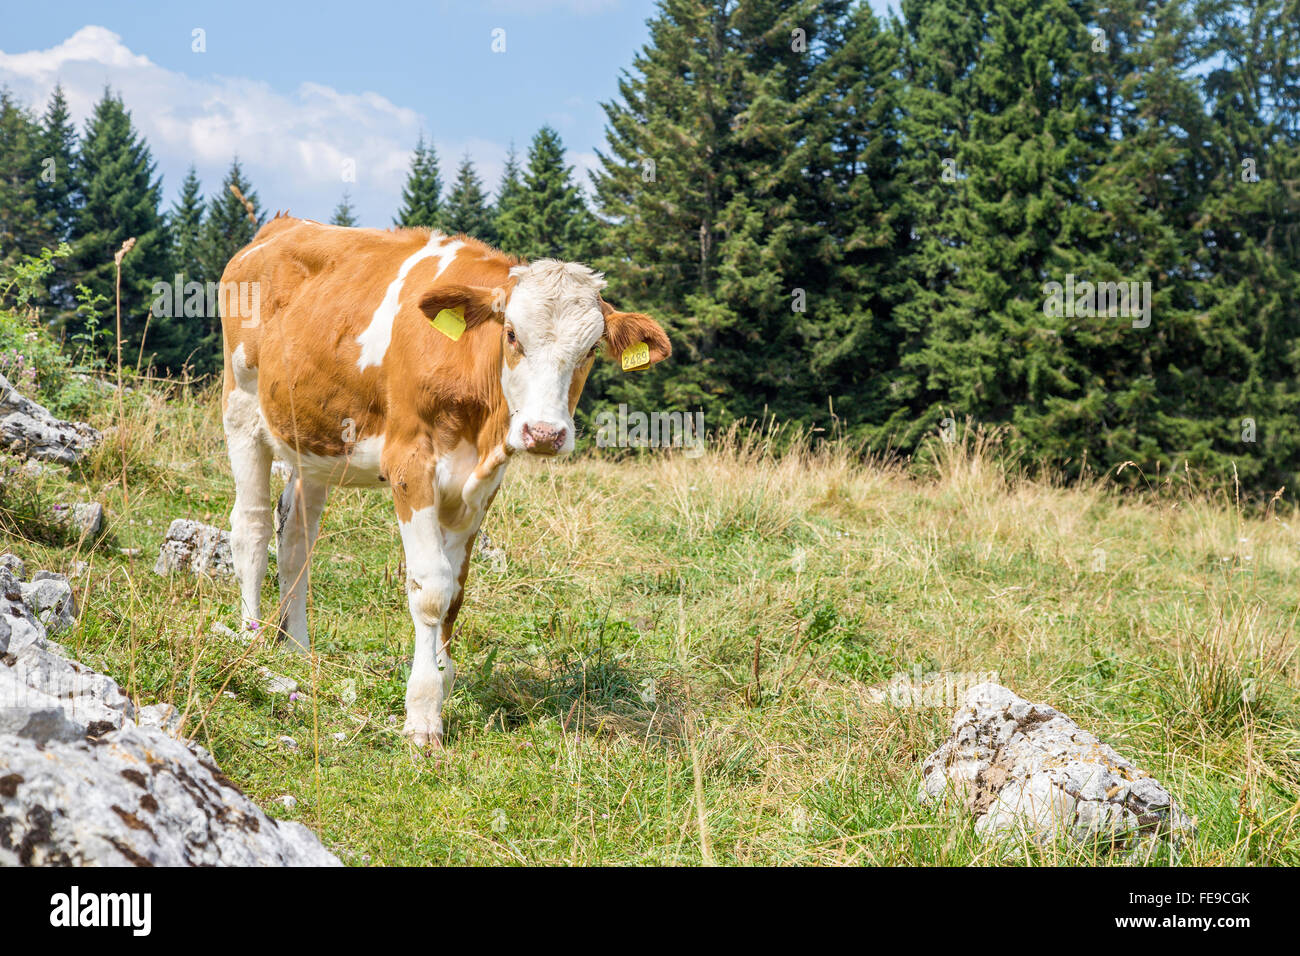 A calf standing and looking at the camera on an alpine pasture Stock Photo